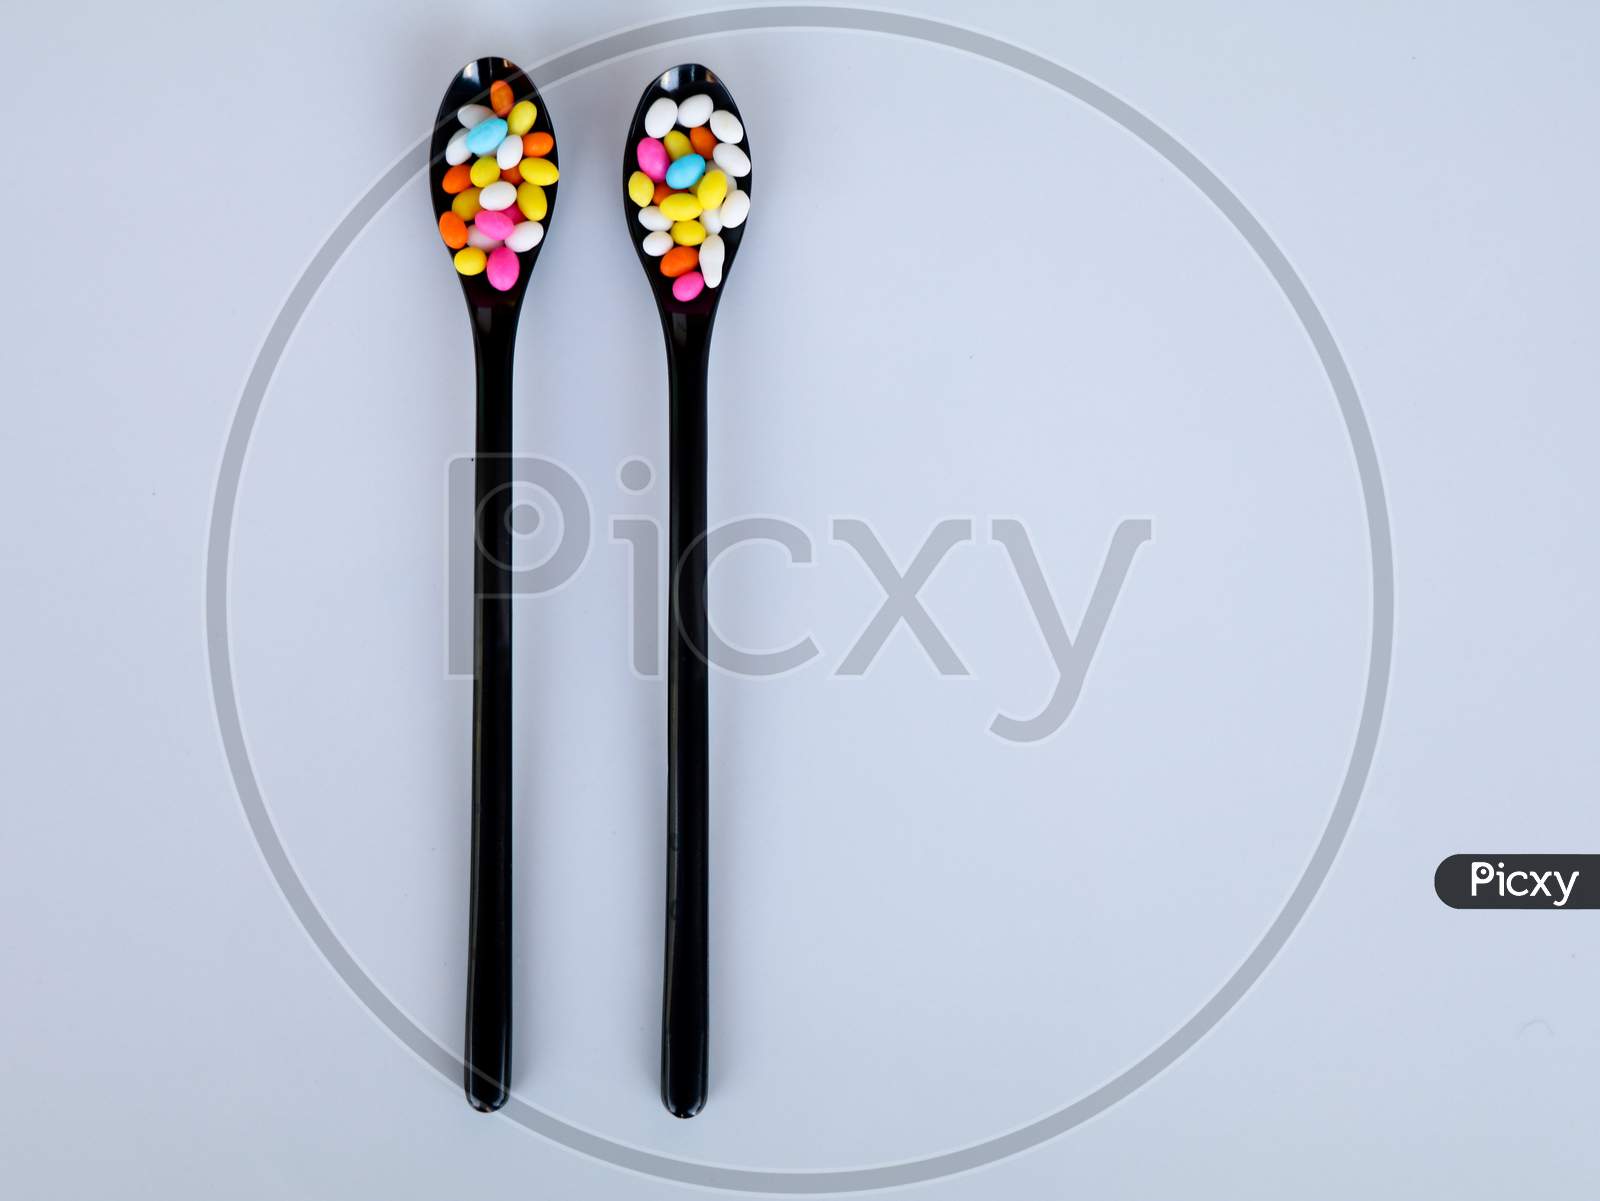 Multi Colored Fennel Sugar Candy In Black Spoons Against White Background With Copy Space, Isolated